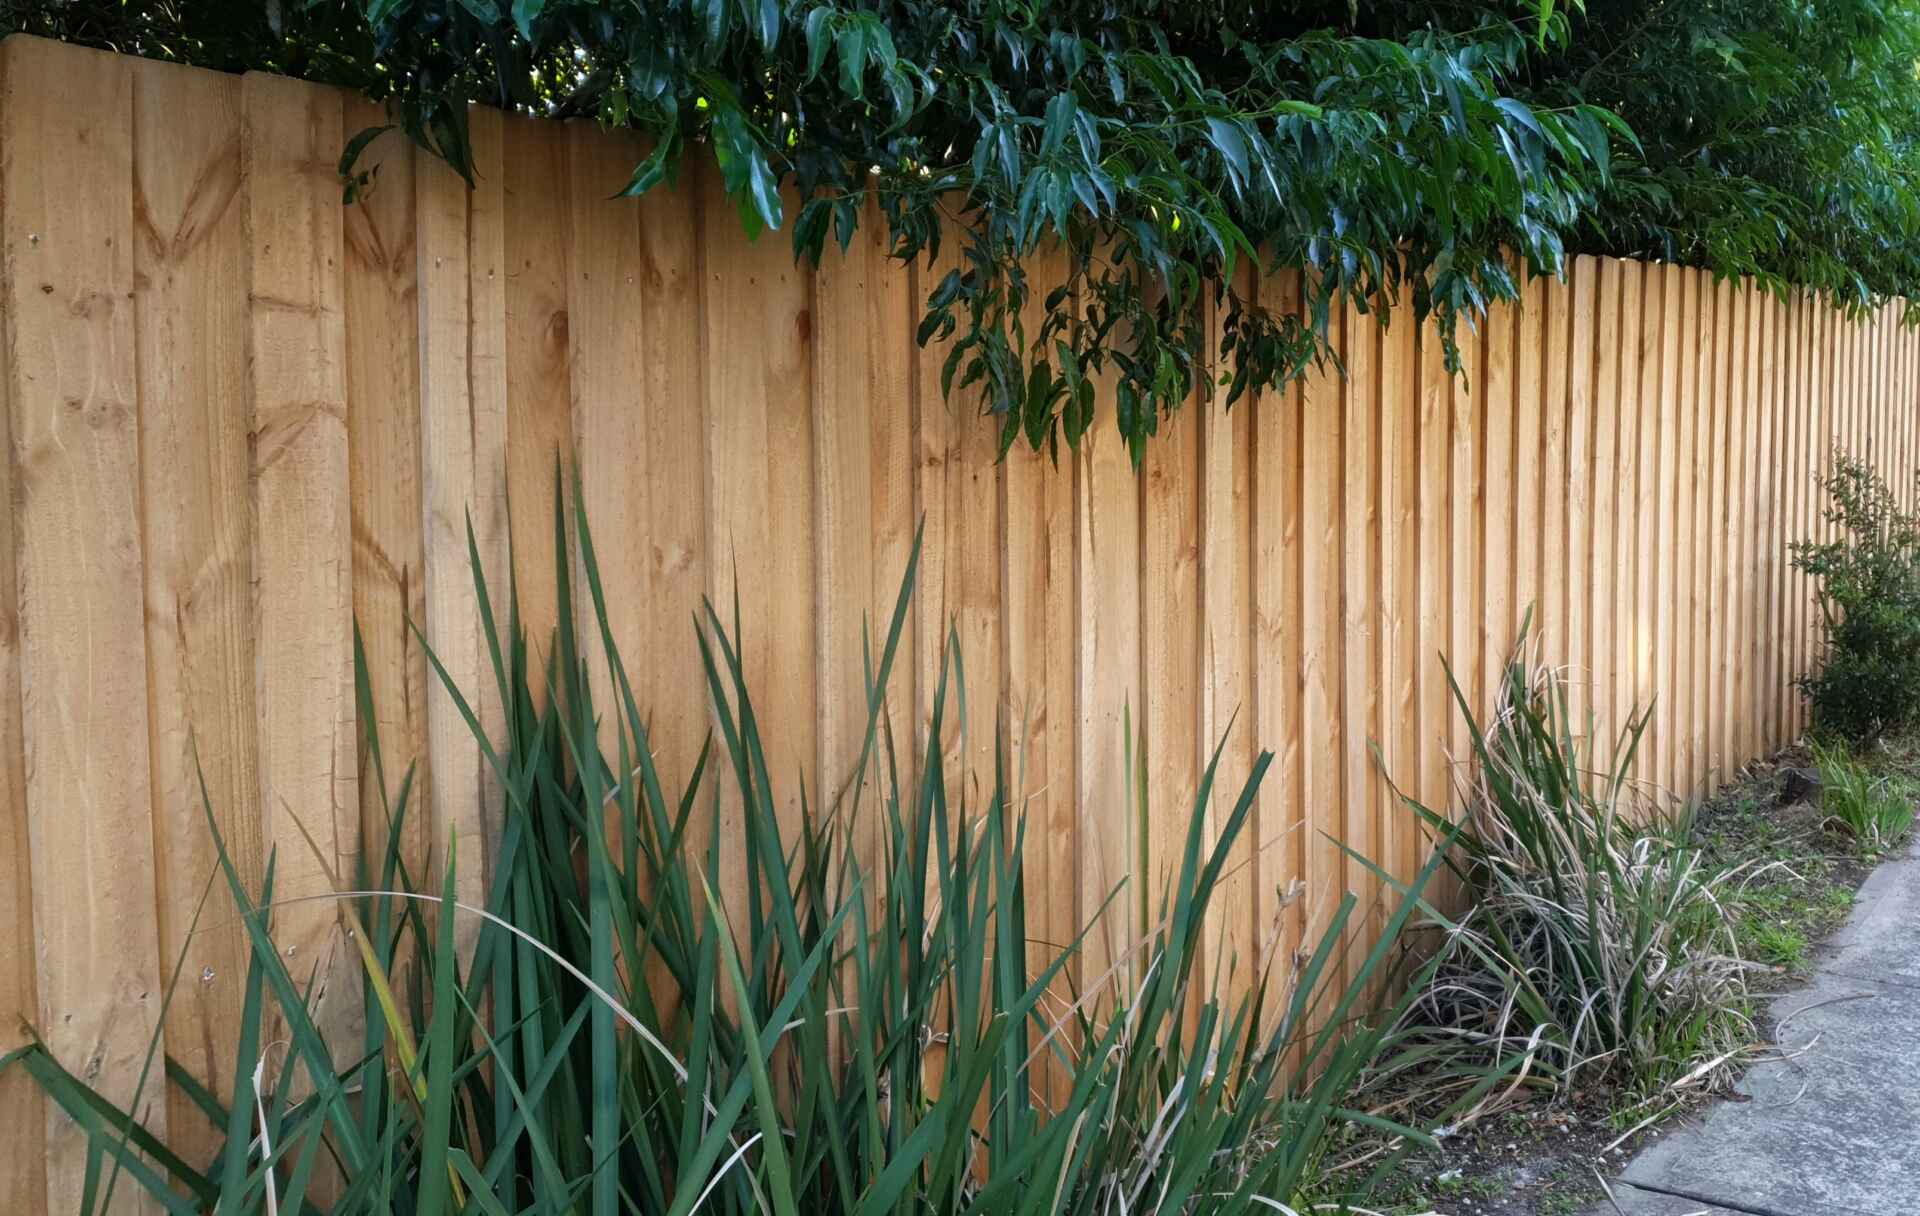 lapped pine paling fence along sidewalk with bushes obscuring bottom of fence